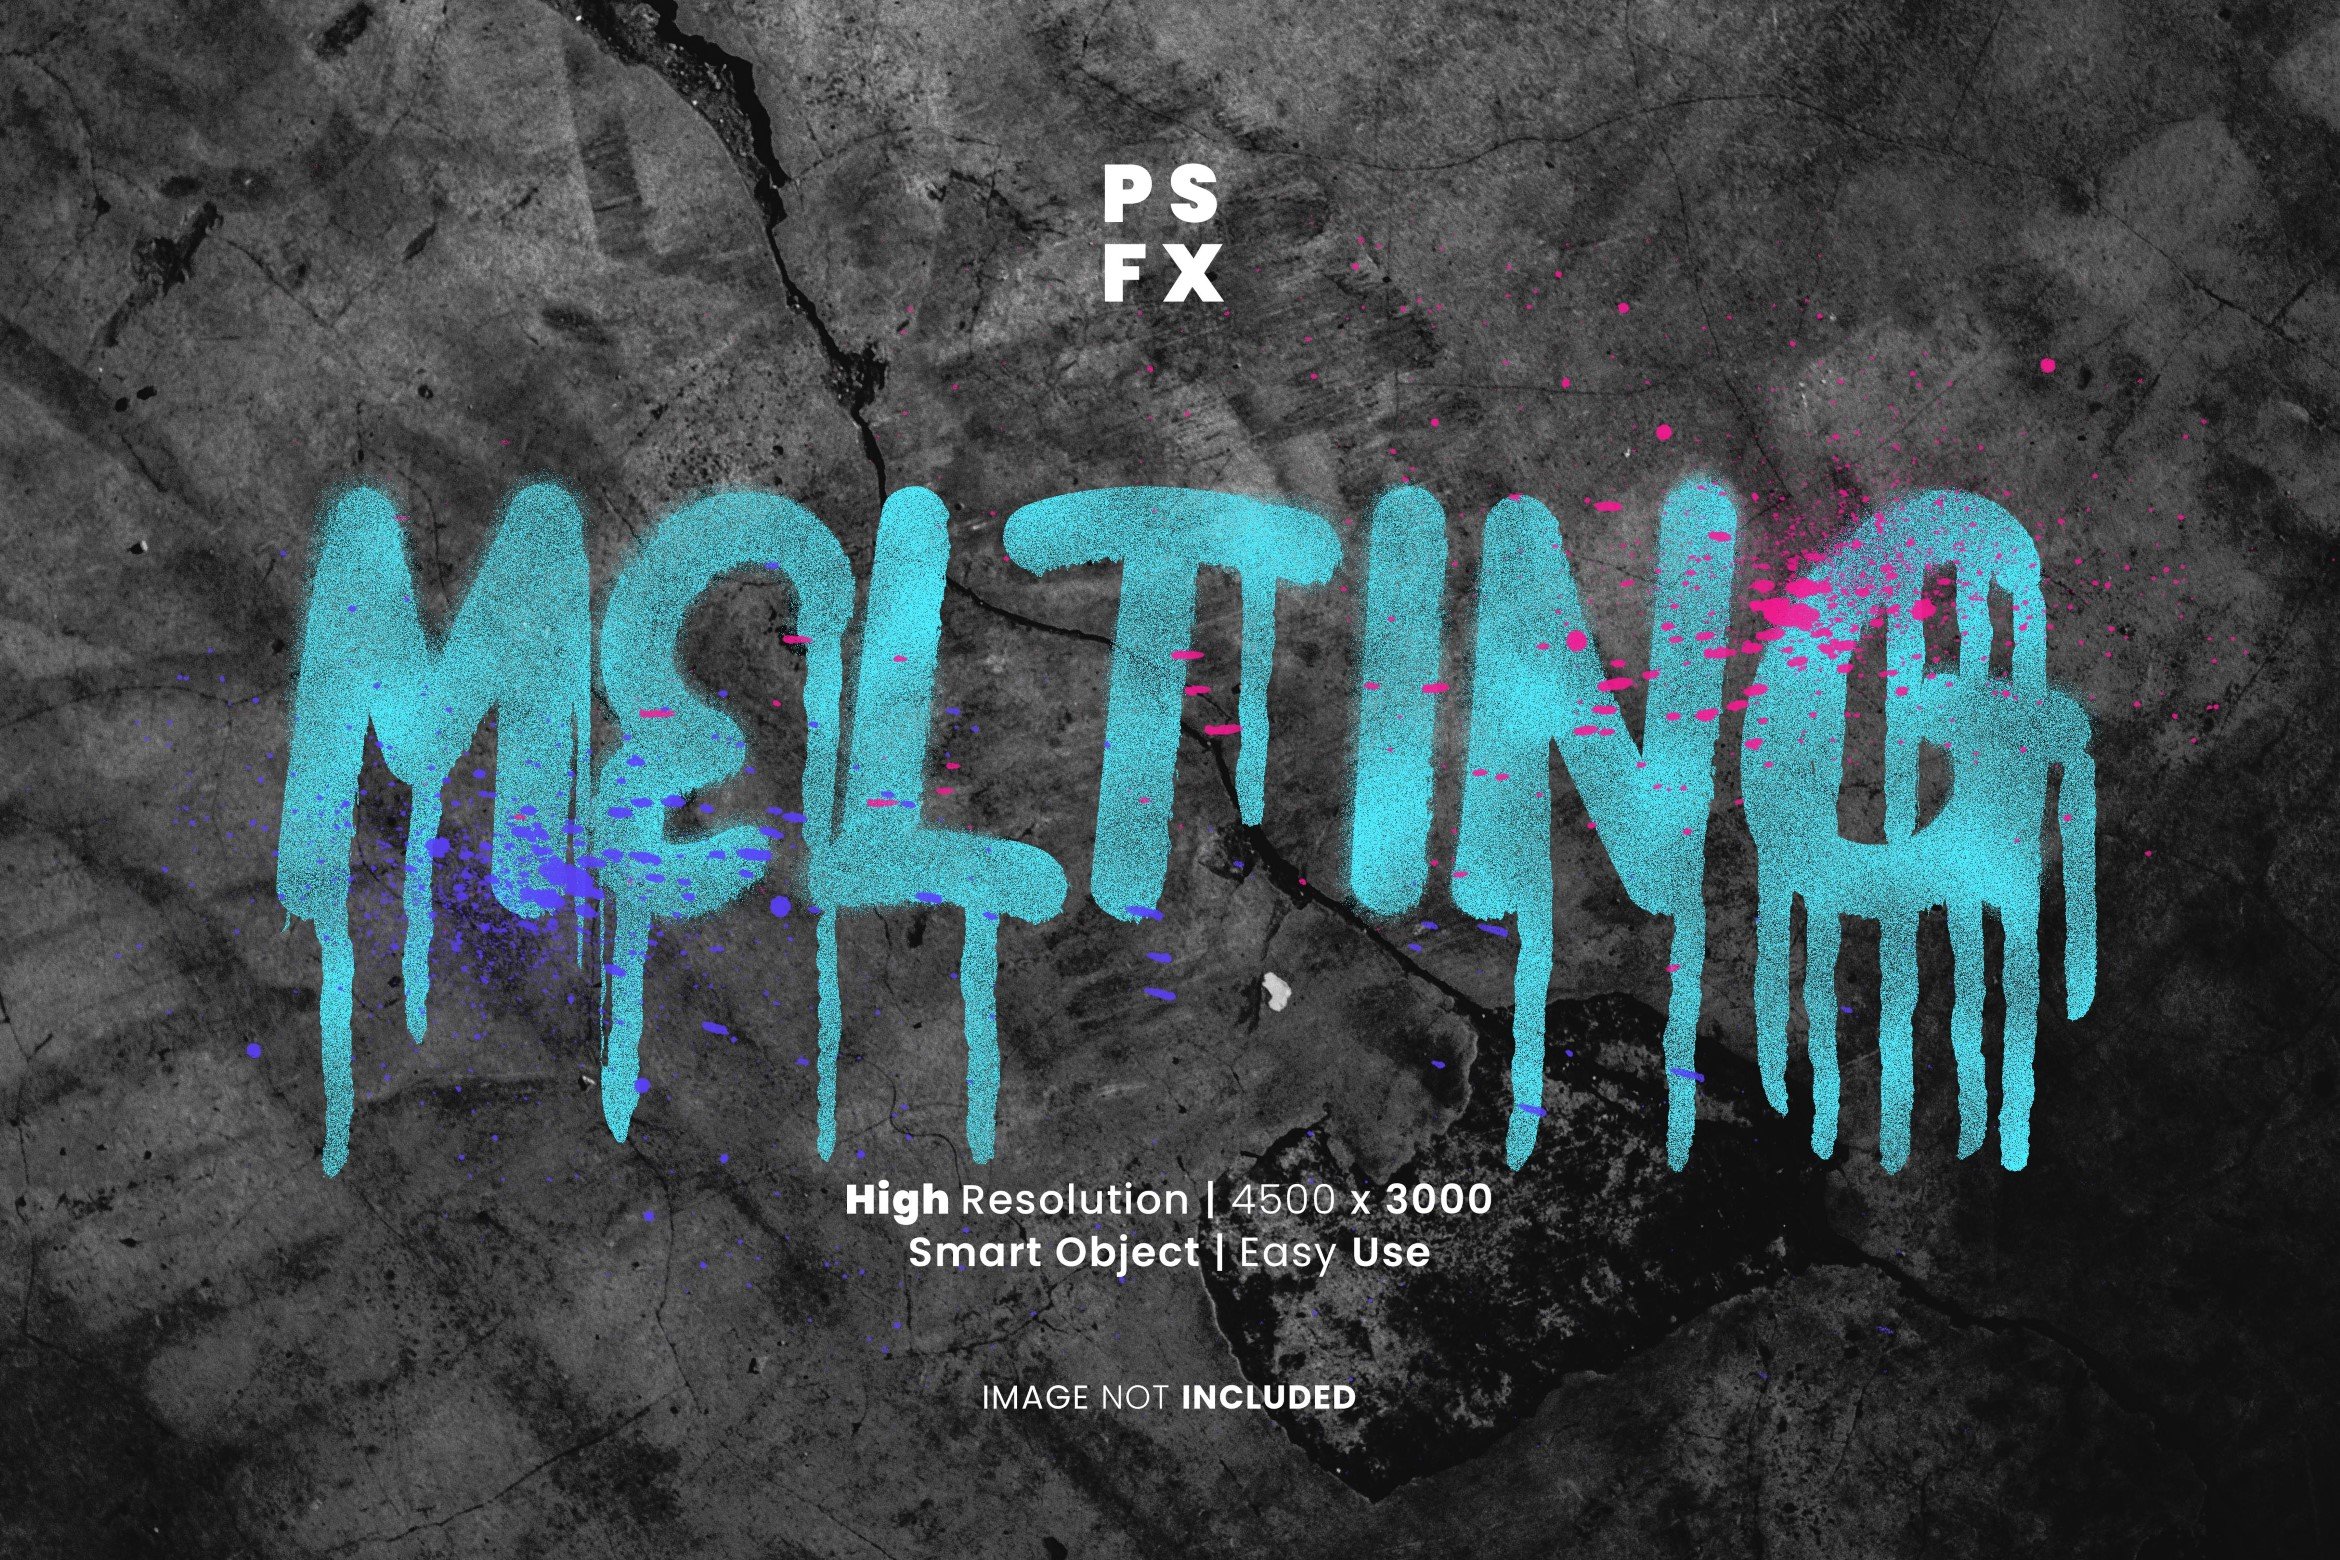 Melting Text Effect Psdpreview image.